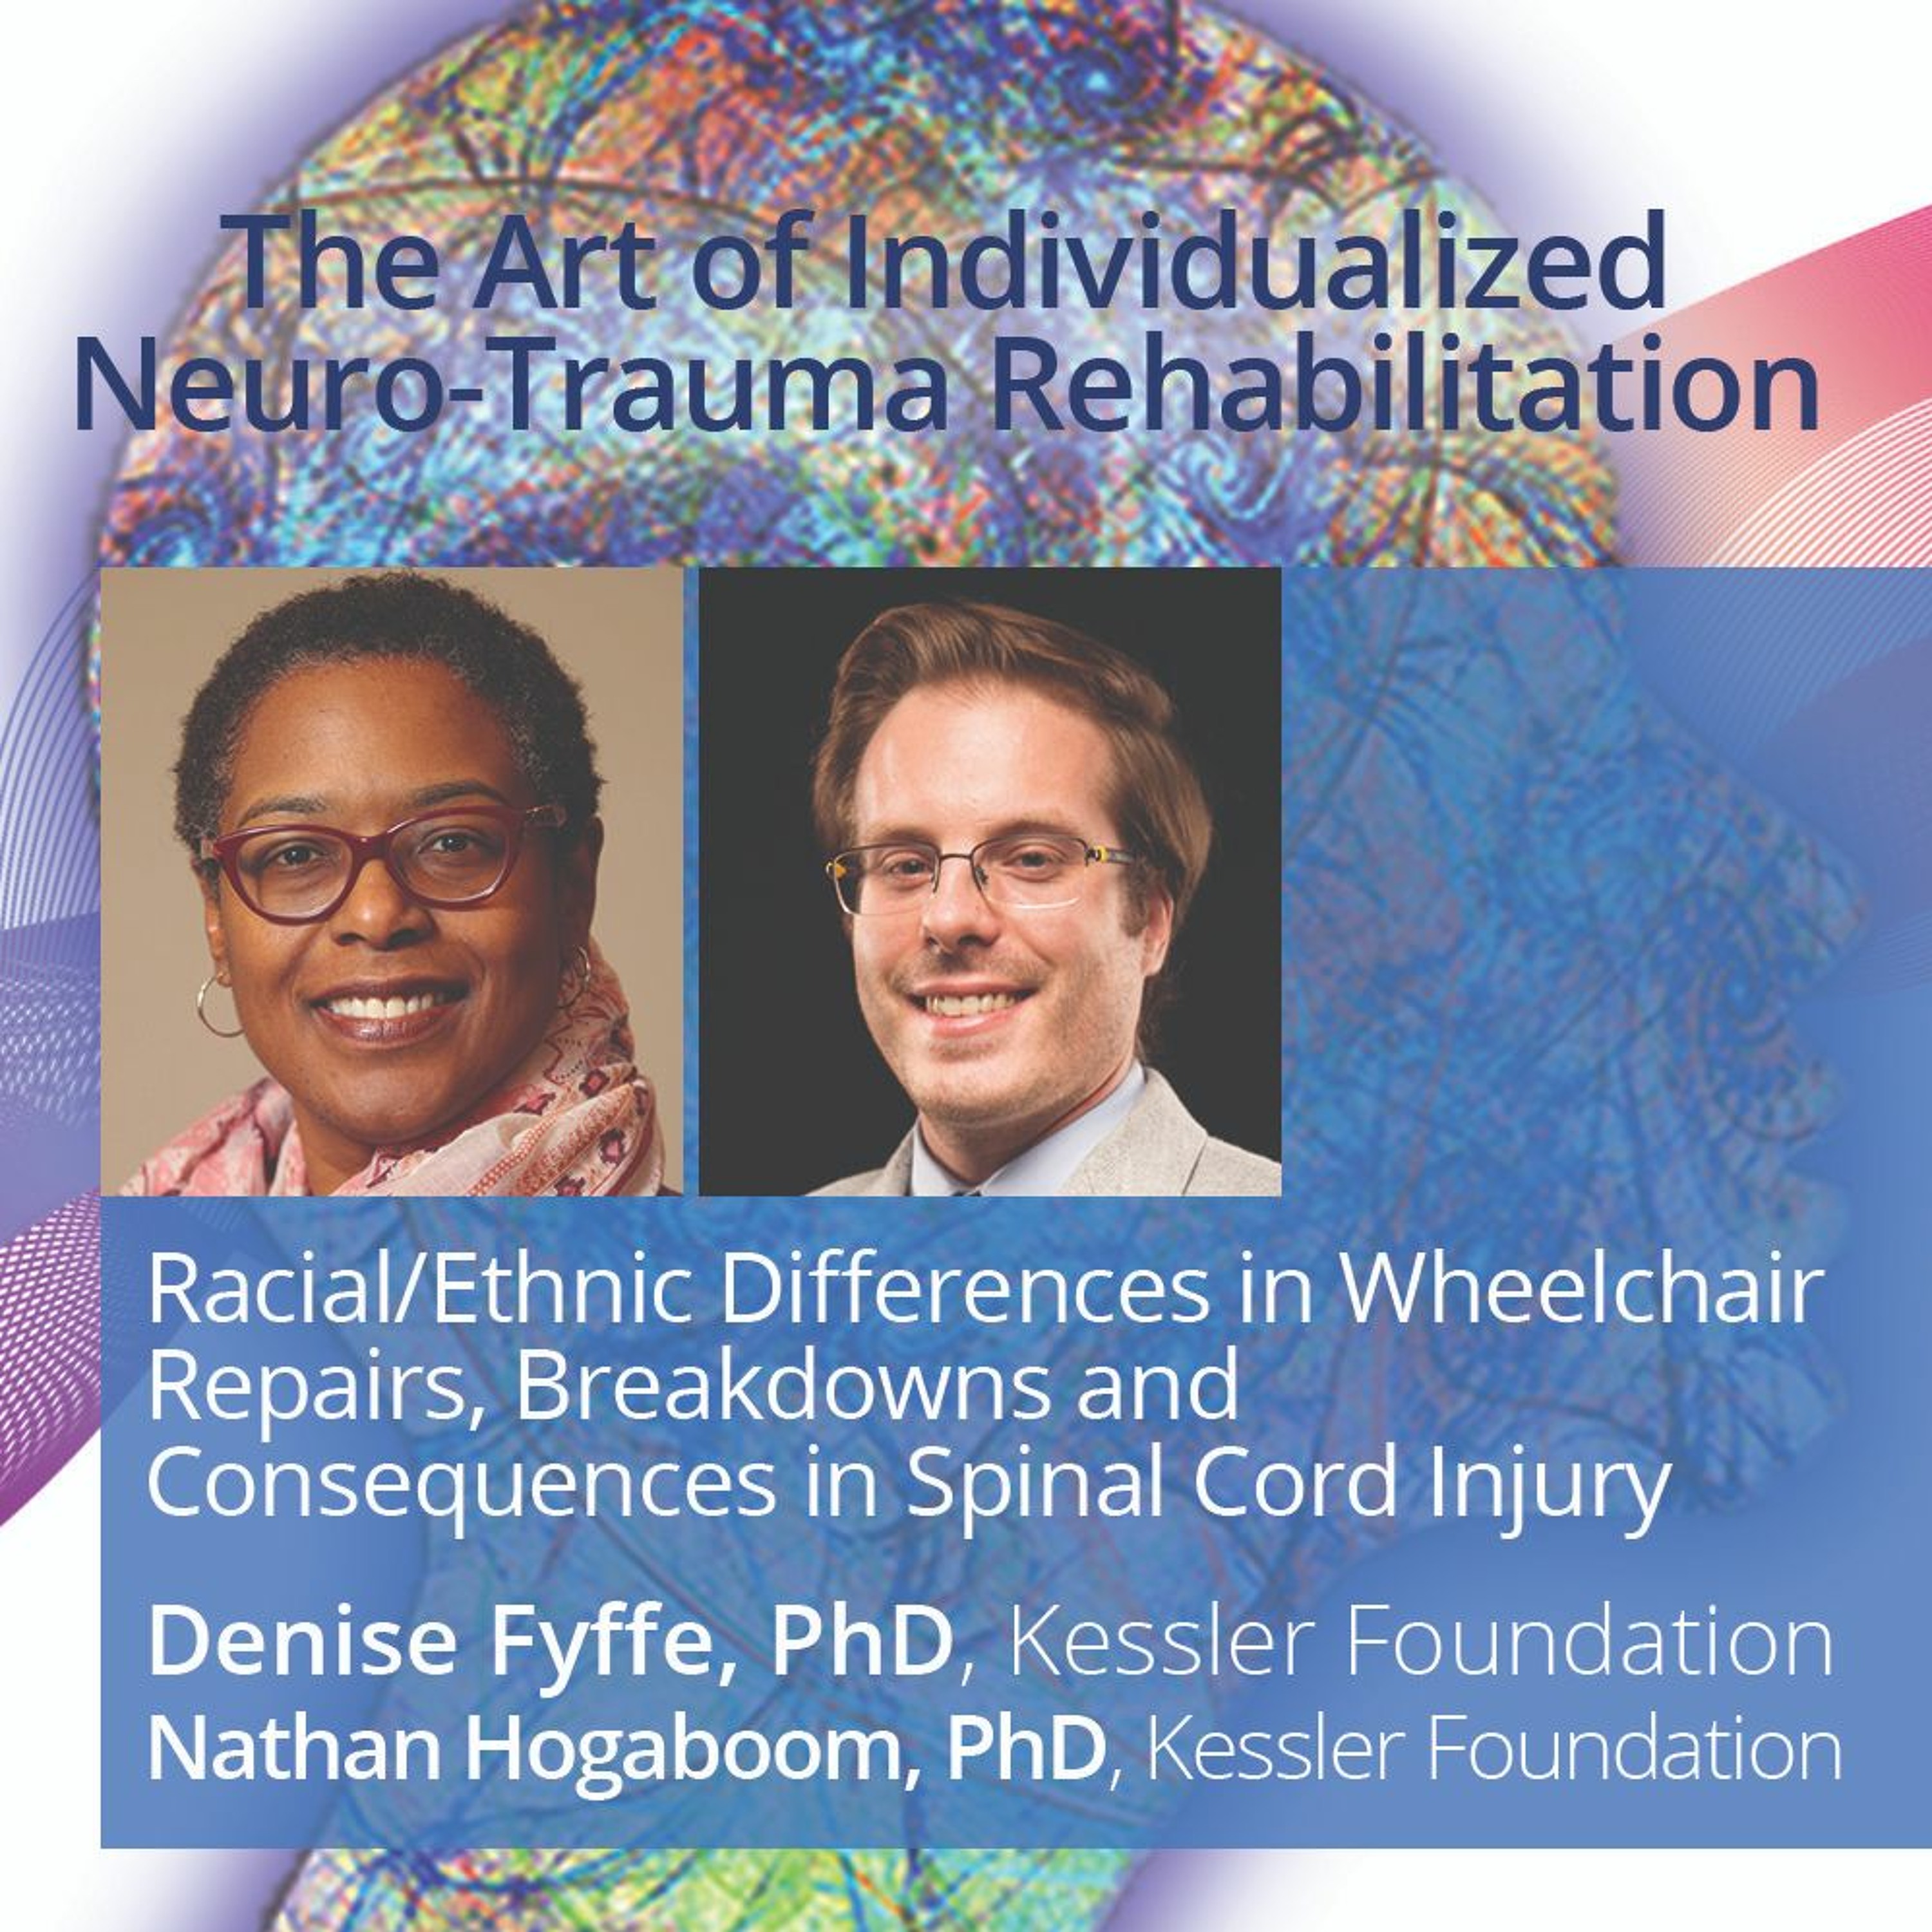 Racial/Ethnic Differences in Wheelchair Repairs, Breakdowns and Consequences in SCI